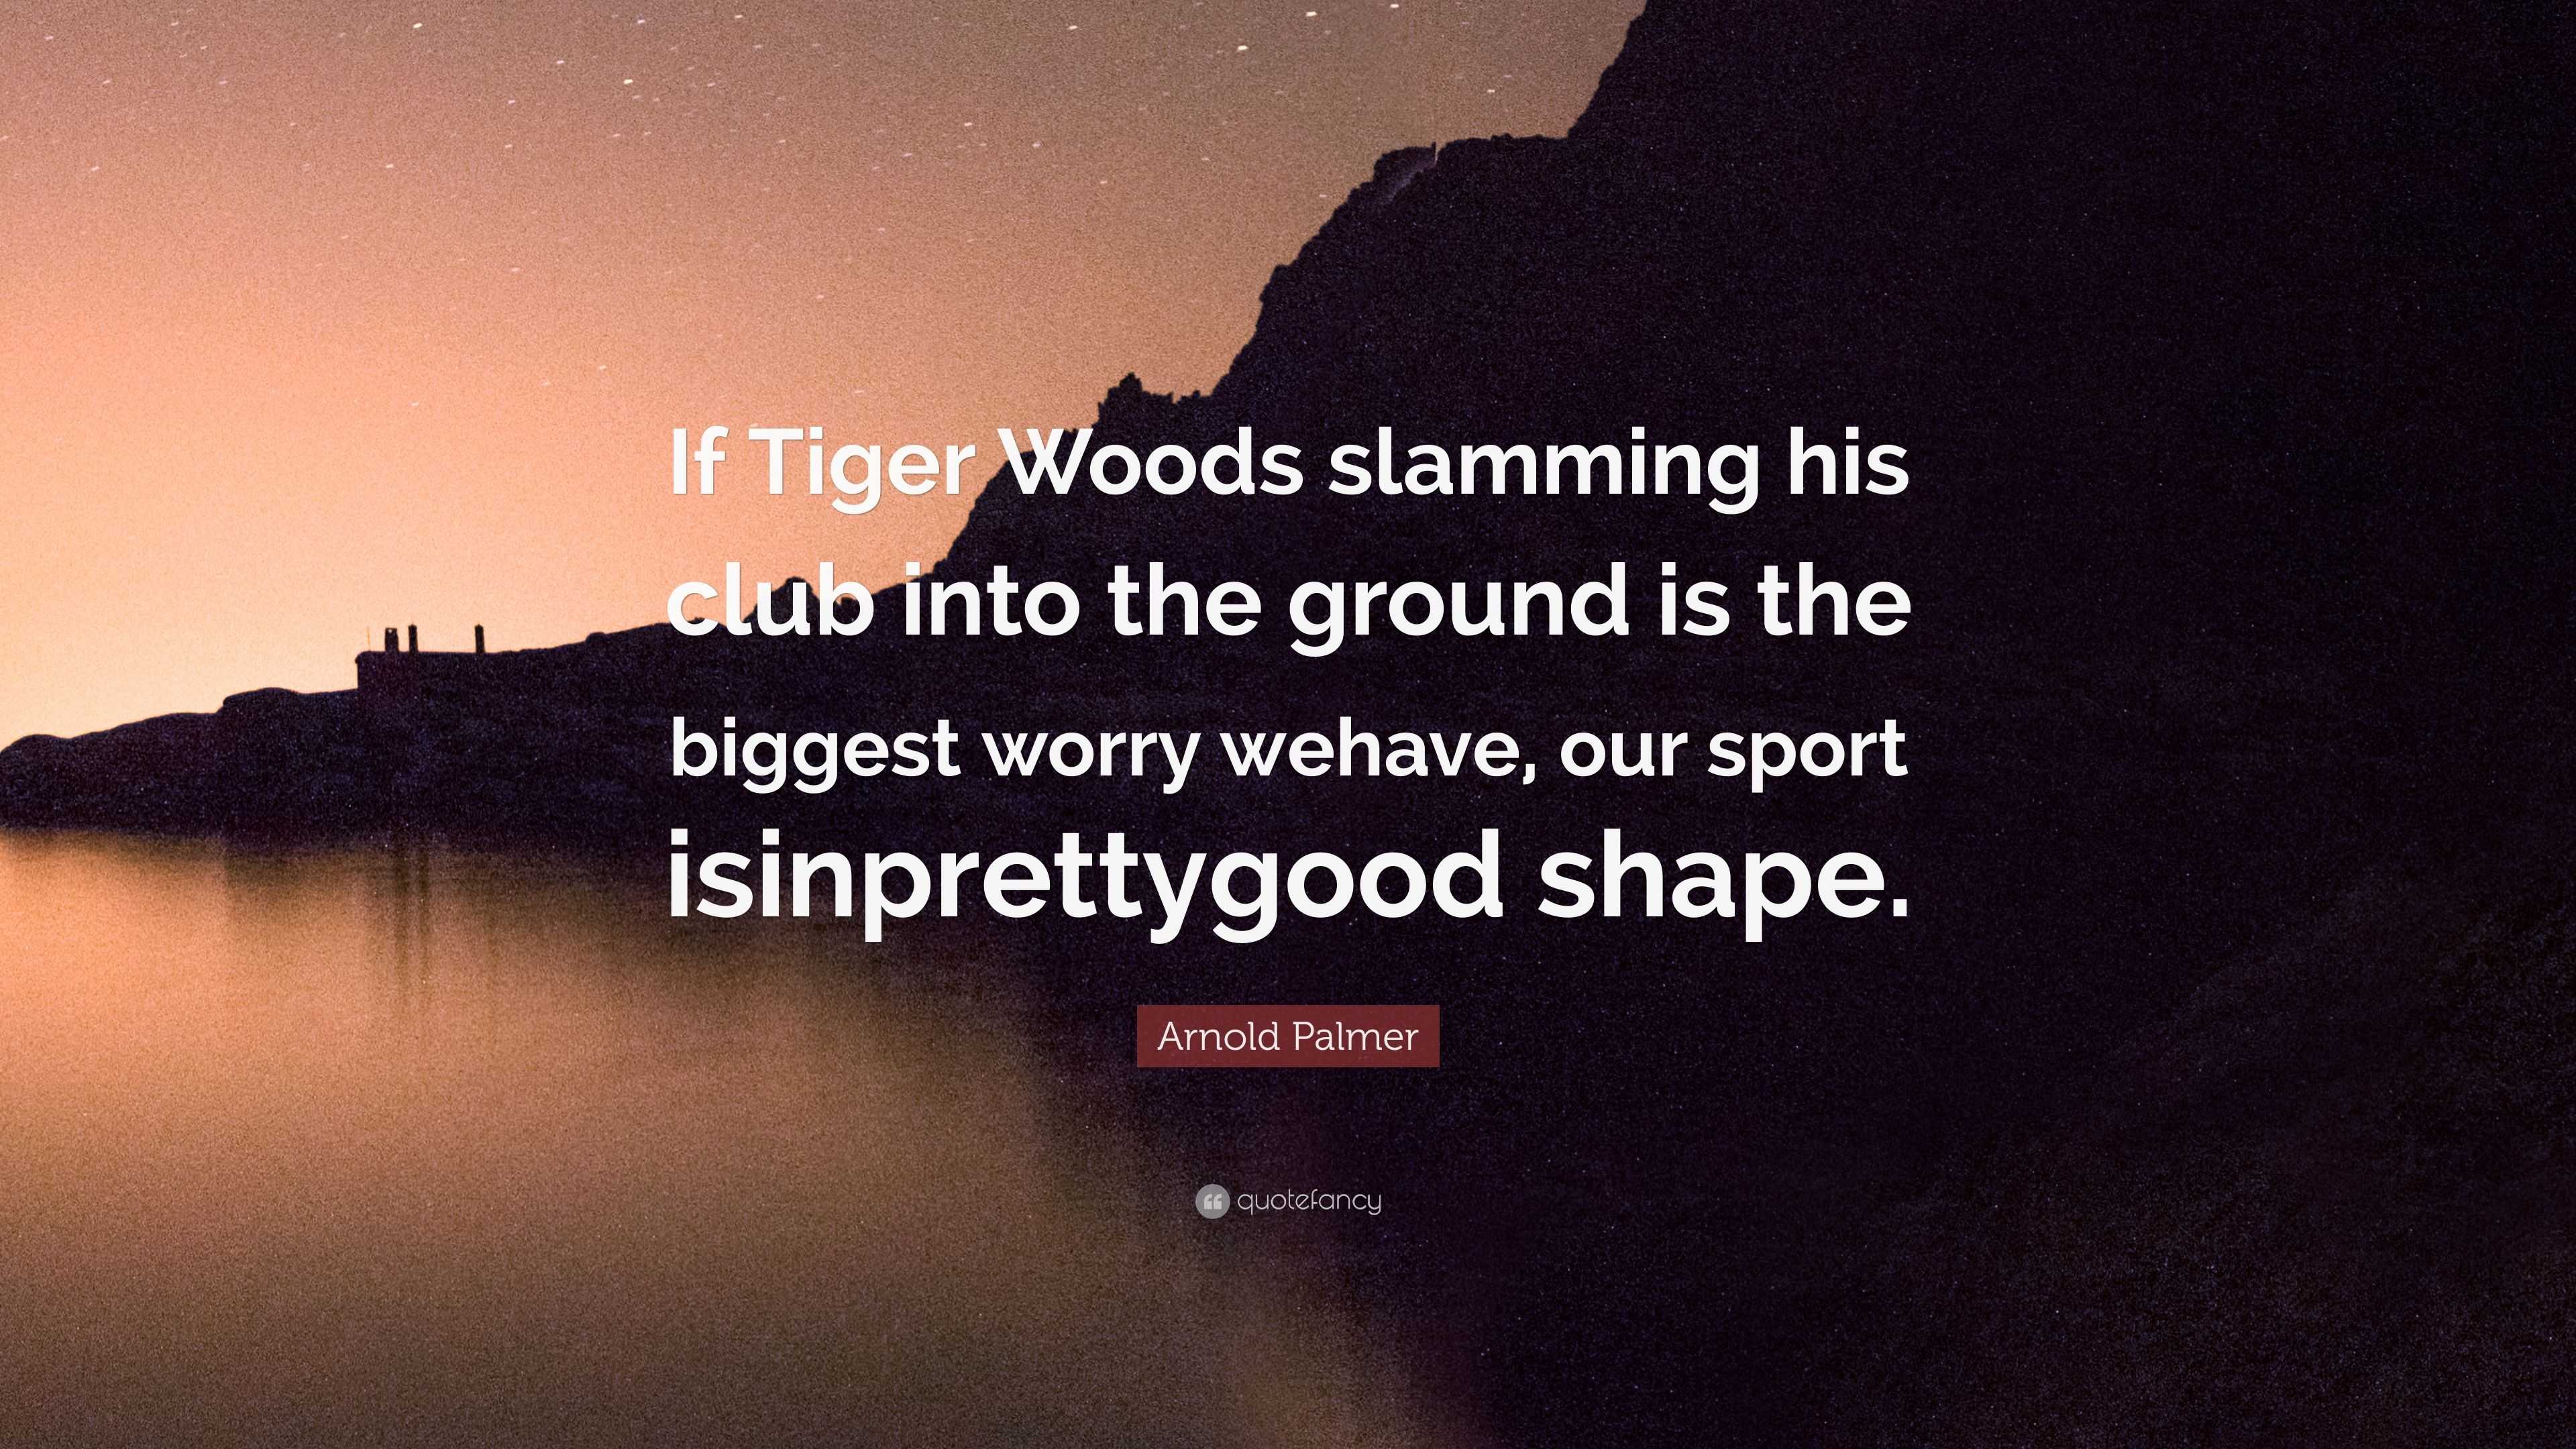 Arnold Palmer Quote: “If Tiger Woods slamming his club into the